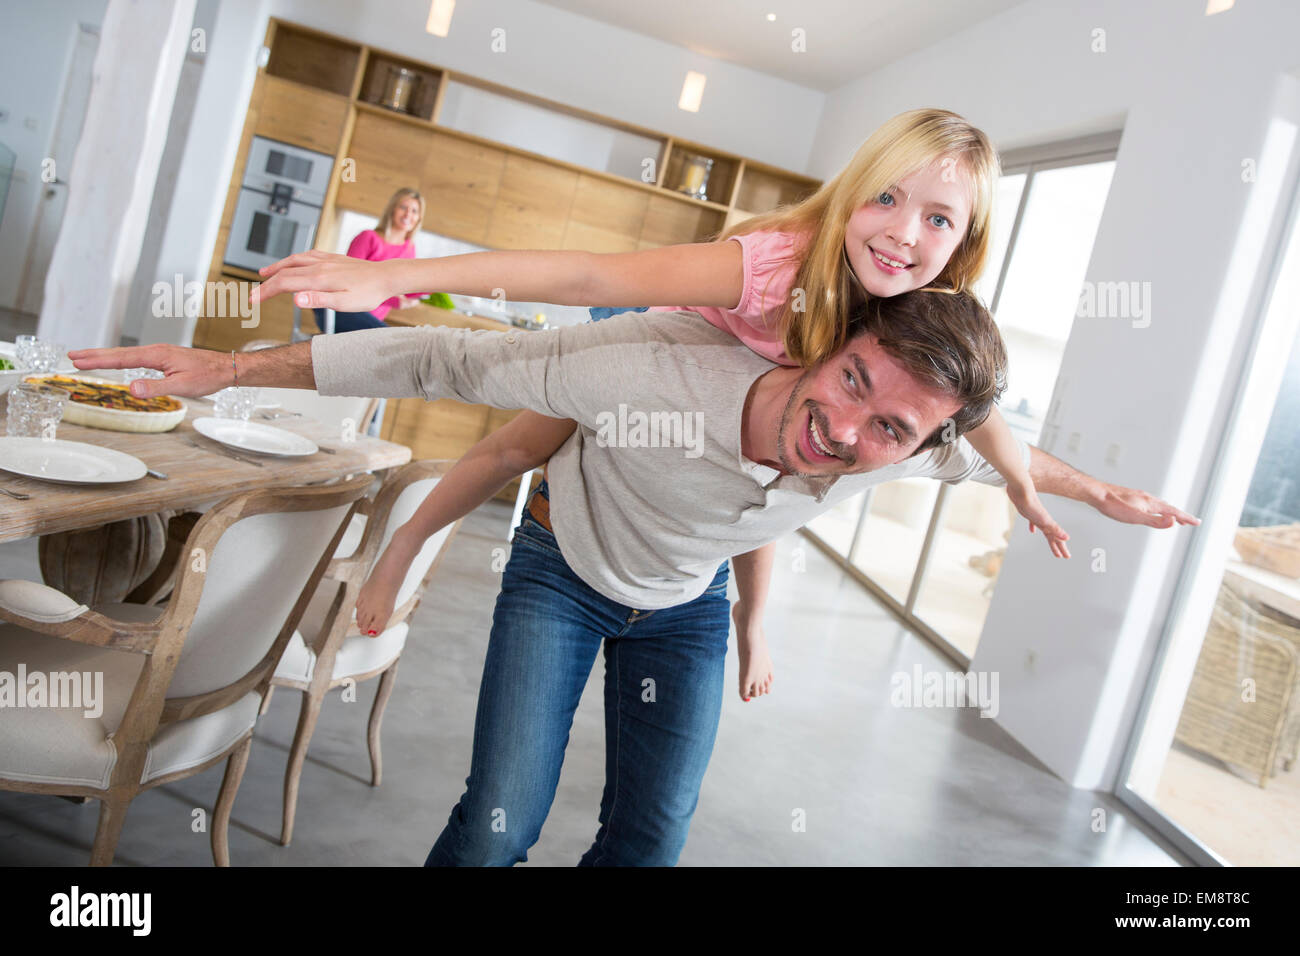 Man giving daughter piggy back in dining room Banque D'Images